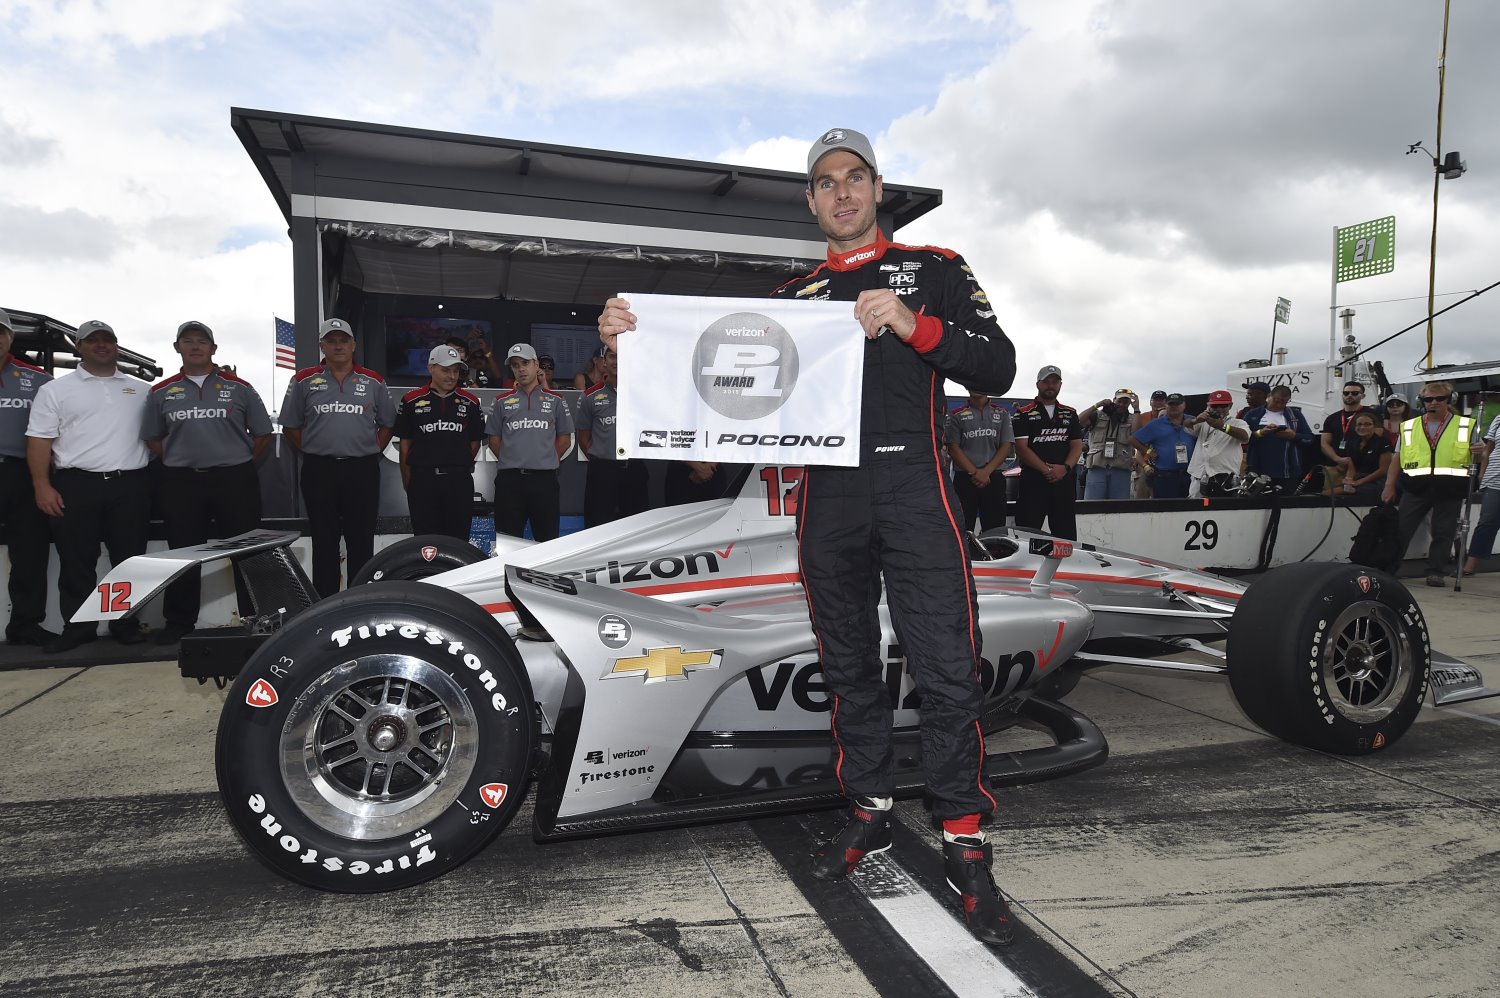 Polesitter Will Power is favored to win for a third straight time at Pocono